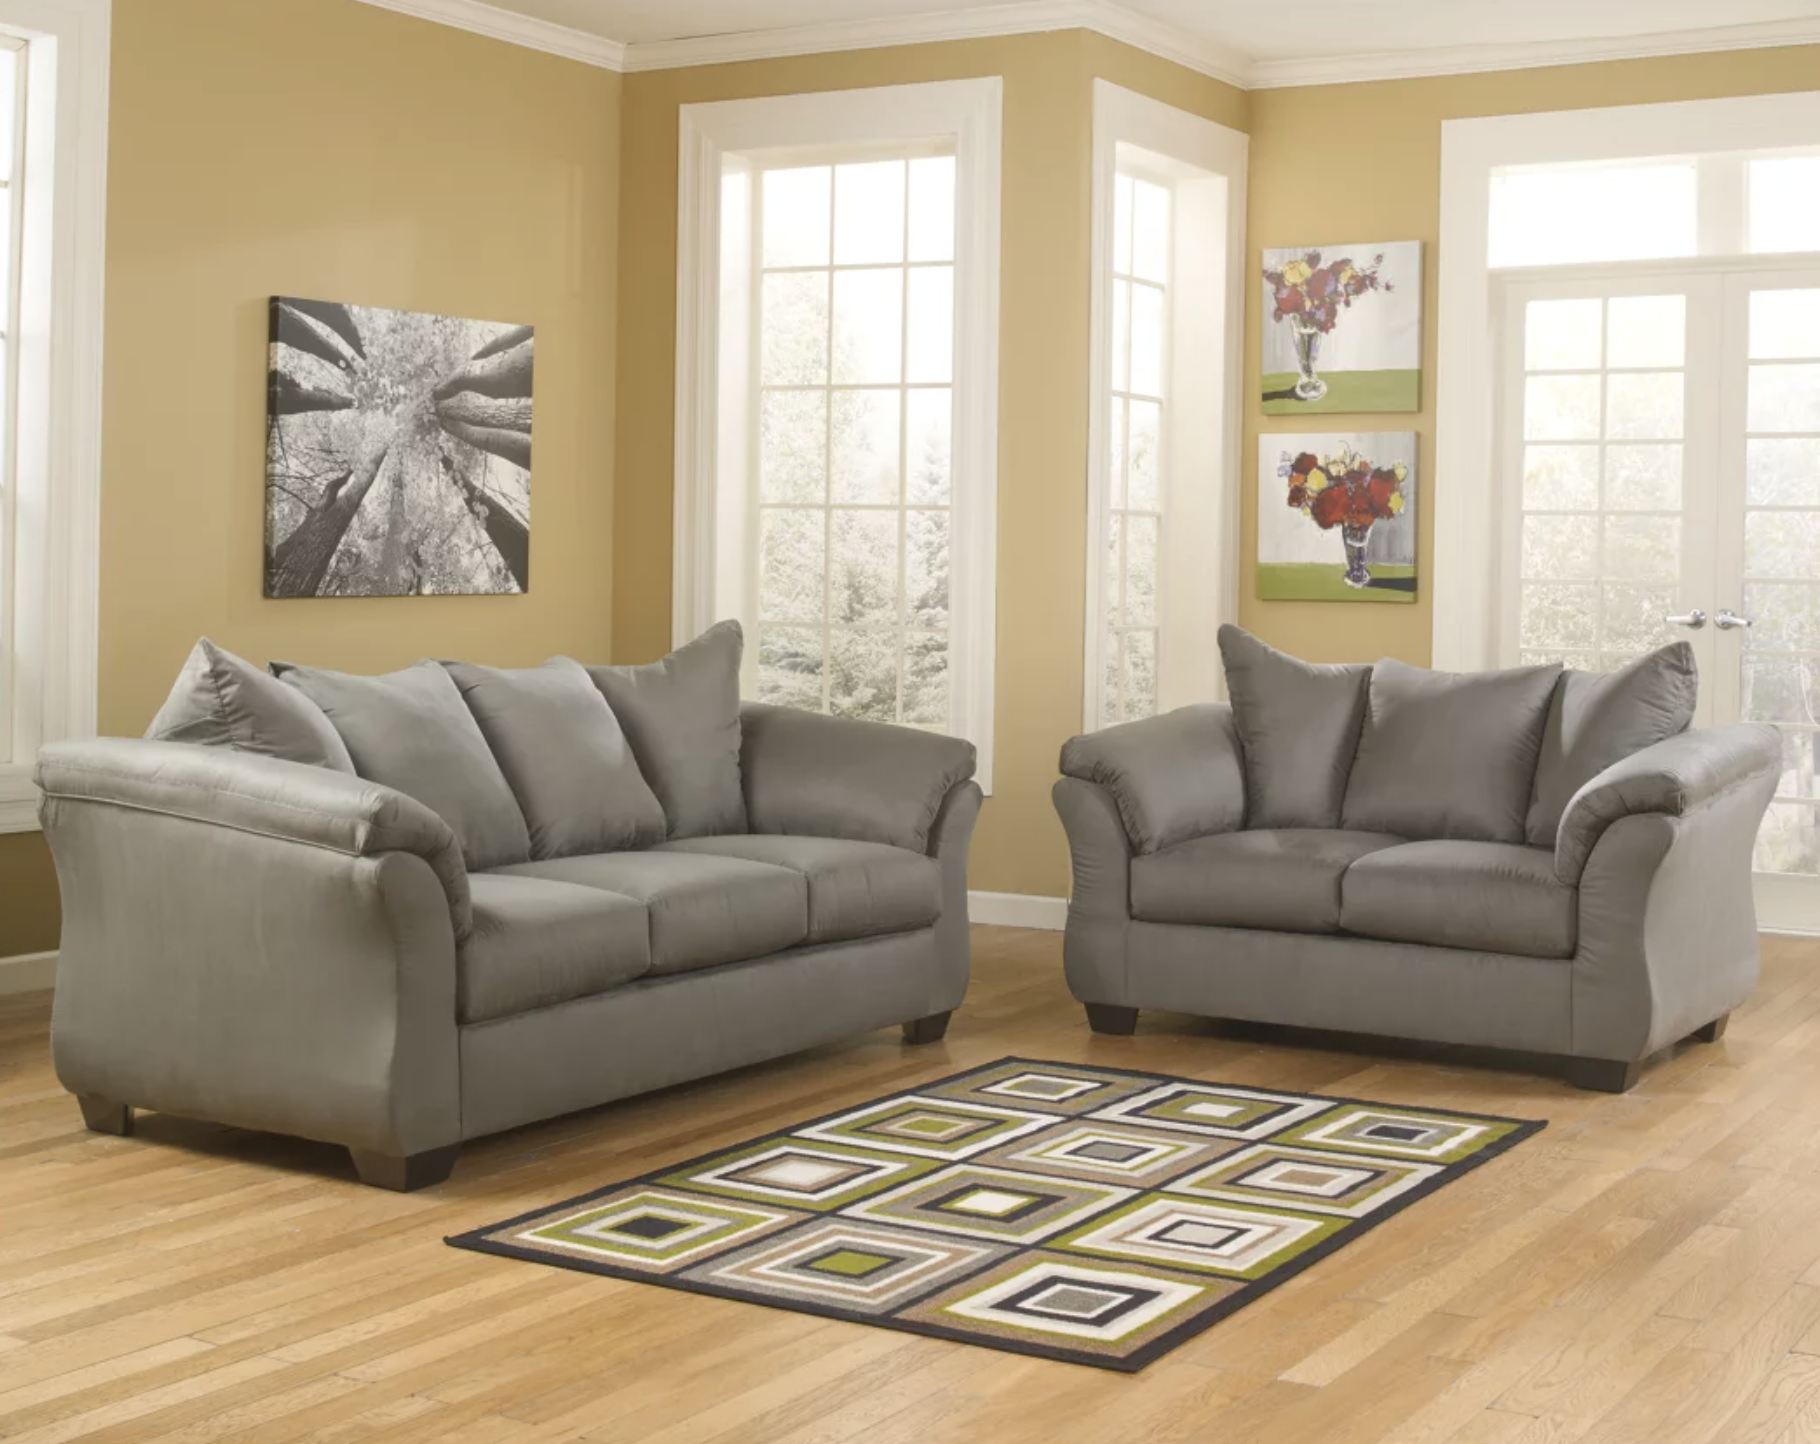 Two gray polyester couches around a rug with green, white, and brown squares